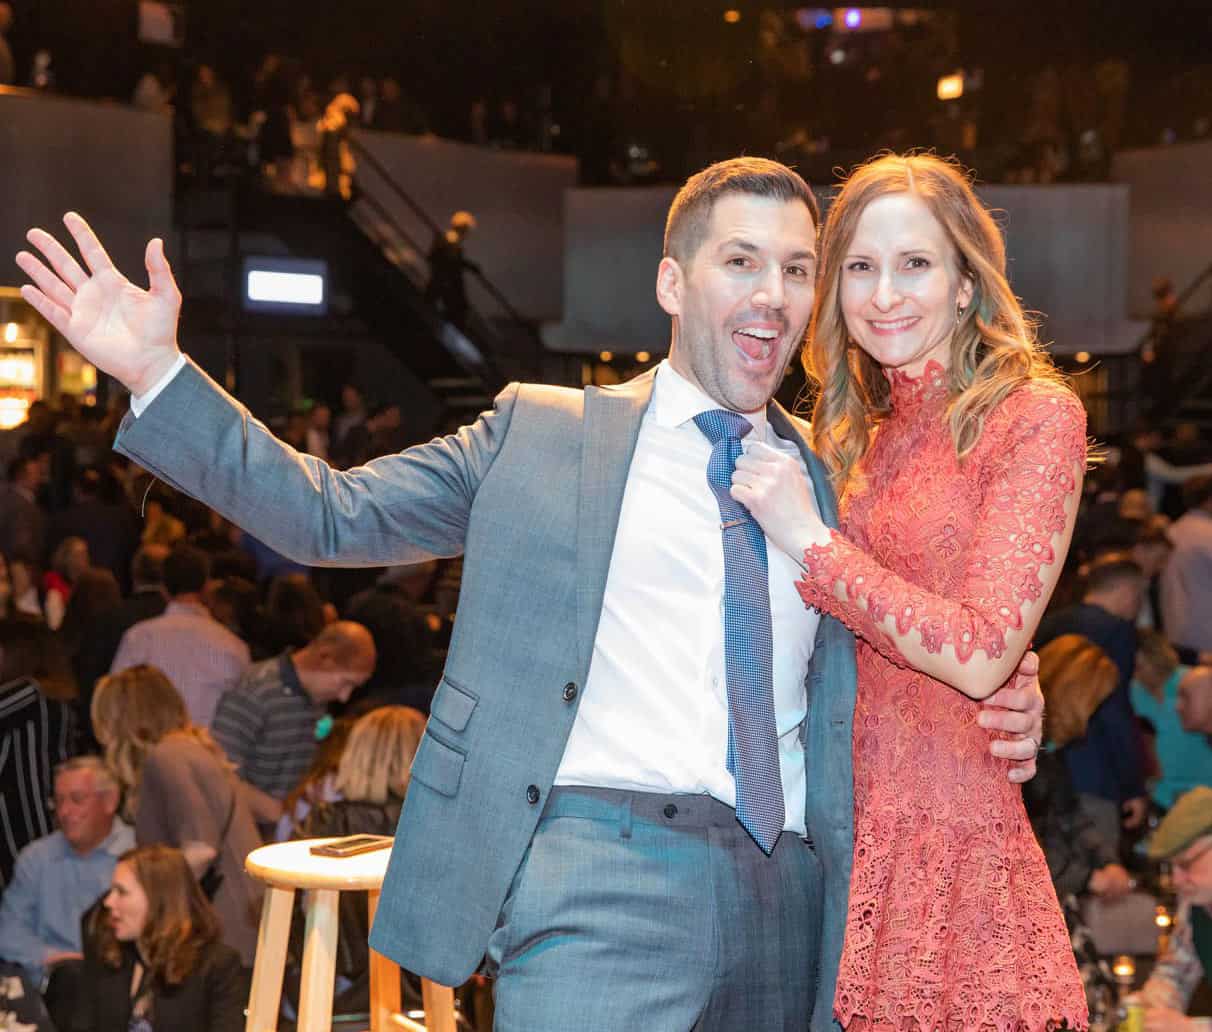 Image of Pat Tomasulo with his wife, Amy Tomasulo 